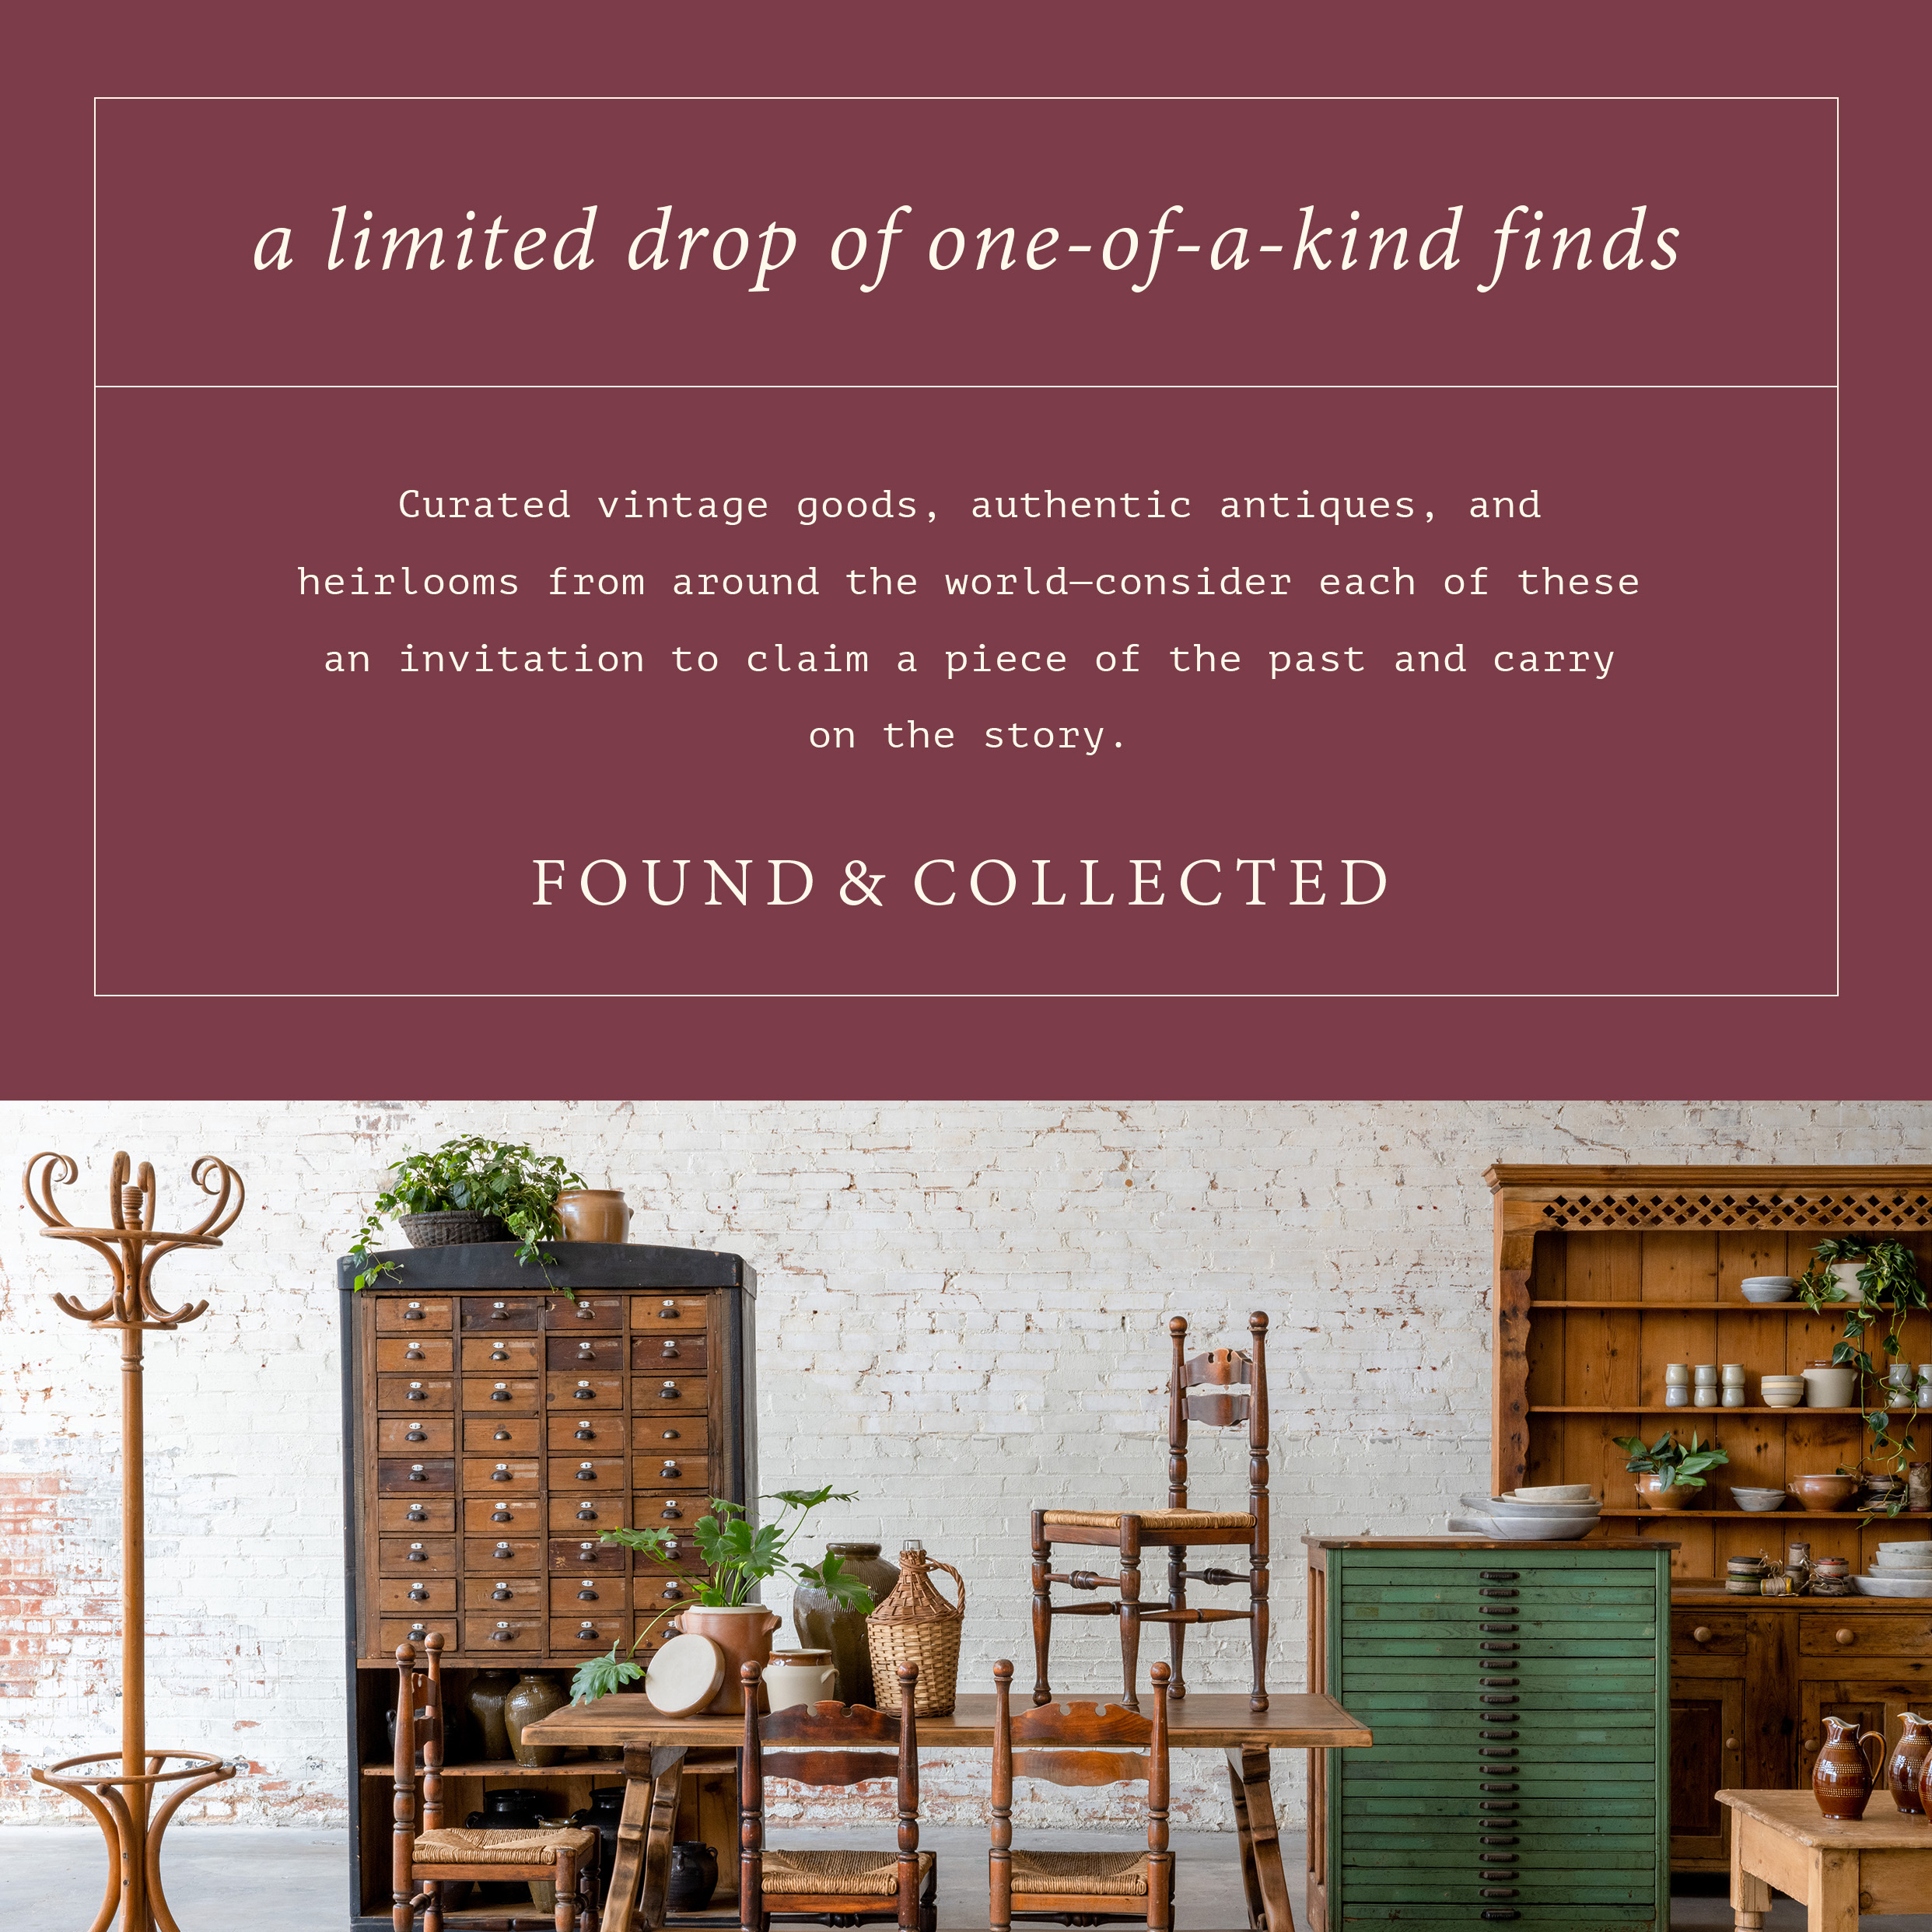 a limited drop of one-of-a-kind finds - curated vintage goods, authentic antiques, and heirlooms from around the world-consider each of these an invitation to claim a piece of the past and carry on the story. Found and collected. antique furniture is pictured.